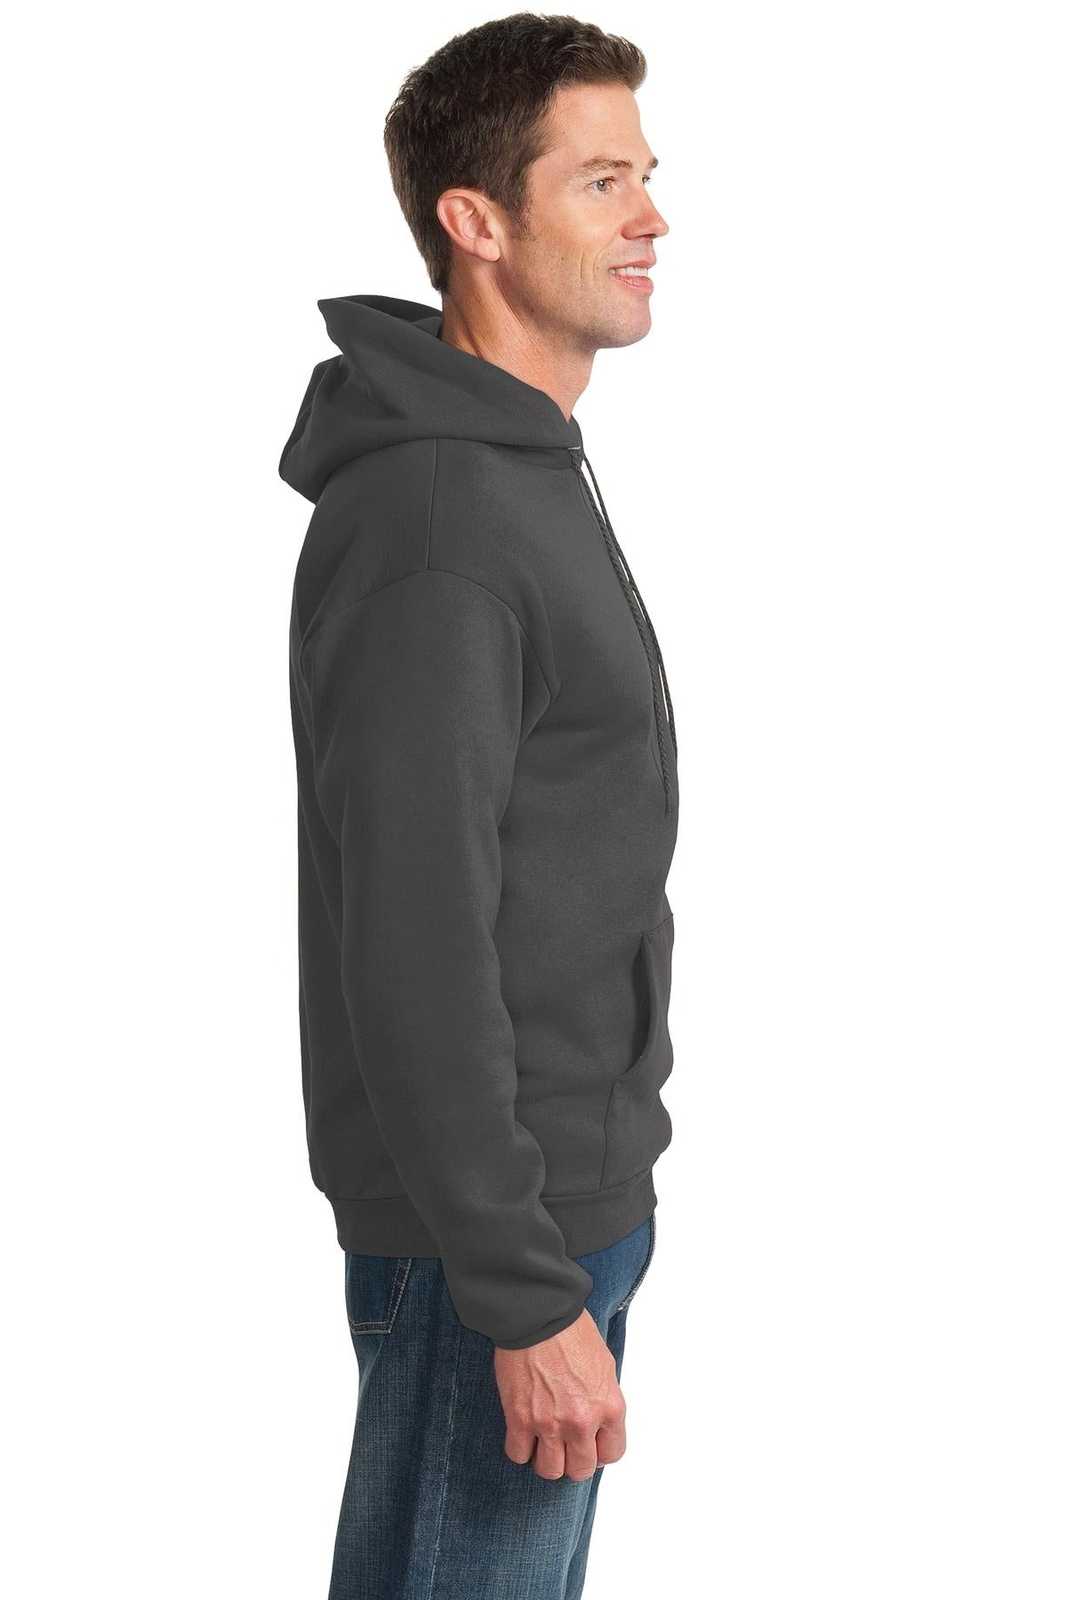 Port &amp; Company PC90H Essential Fleece Pullover Hooded Sweatshirt - Charcoal - HIT a Double - 3